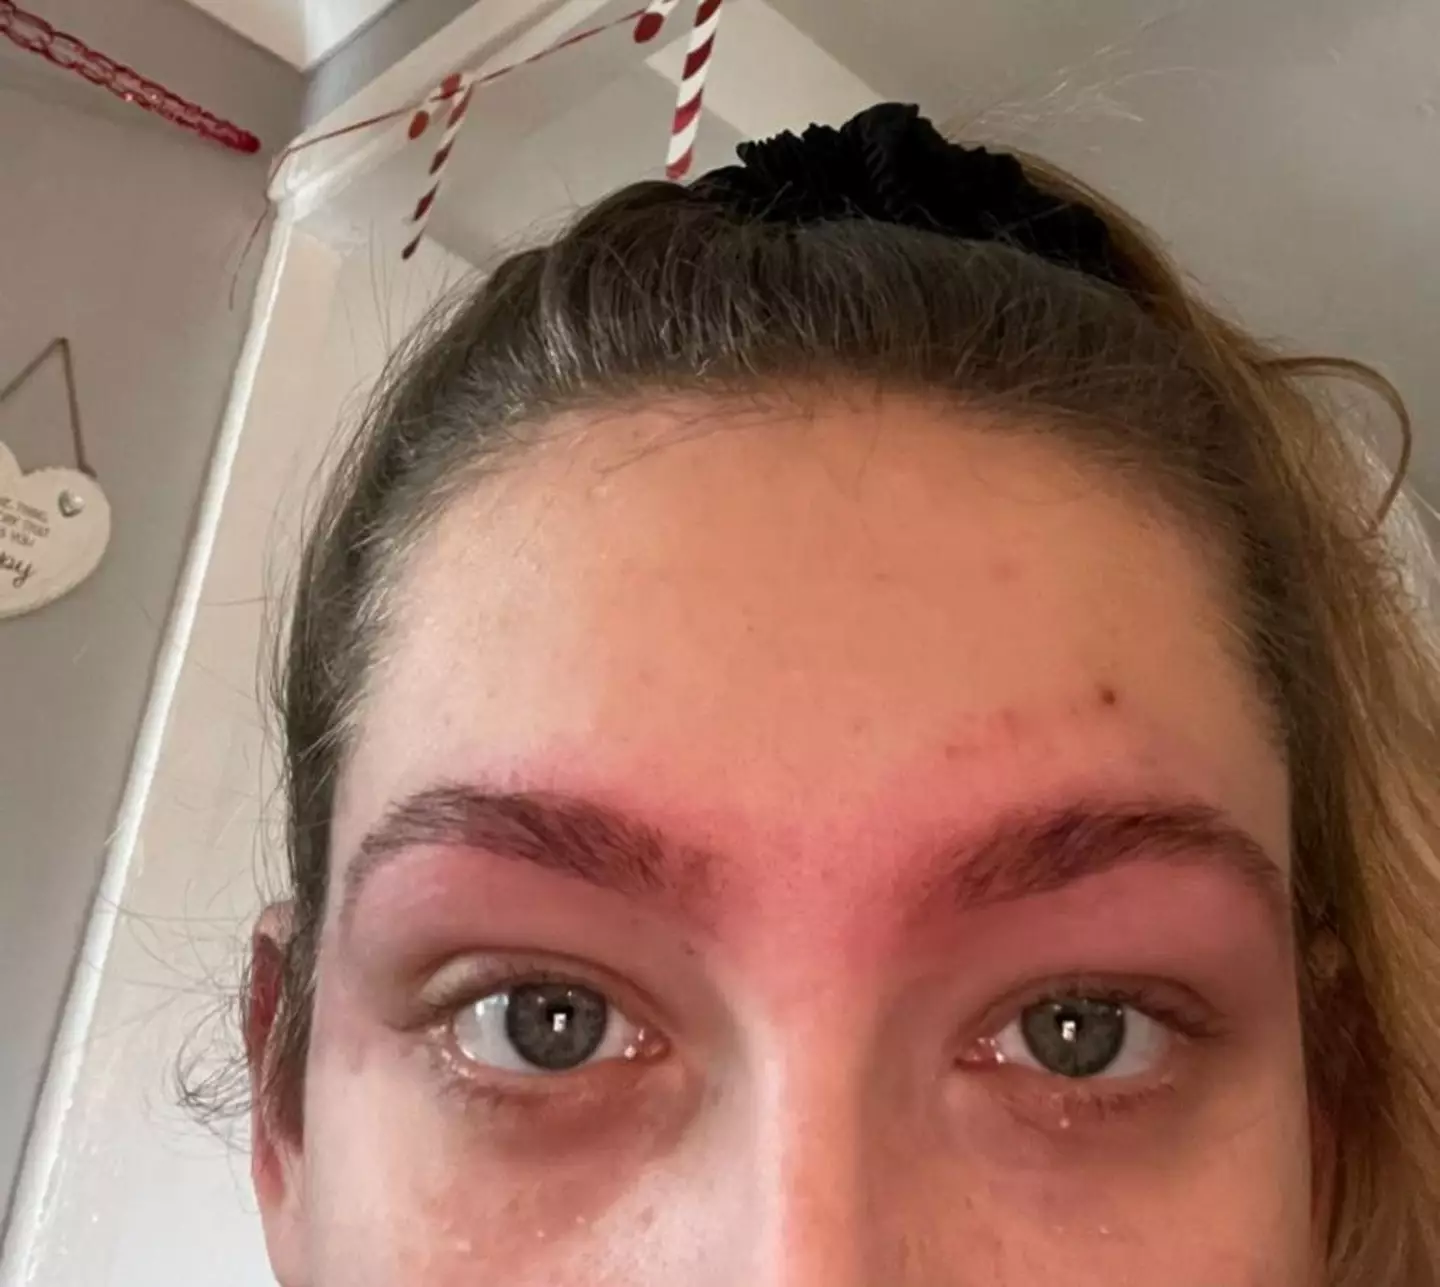 Megan began to worry when she started experiencing an intense burning sensation across her brows and face.